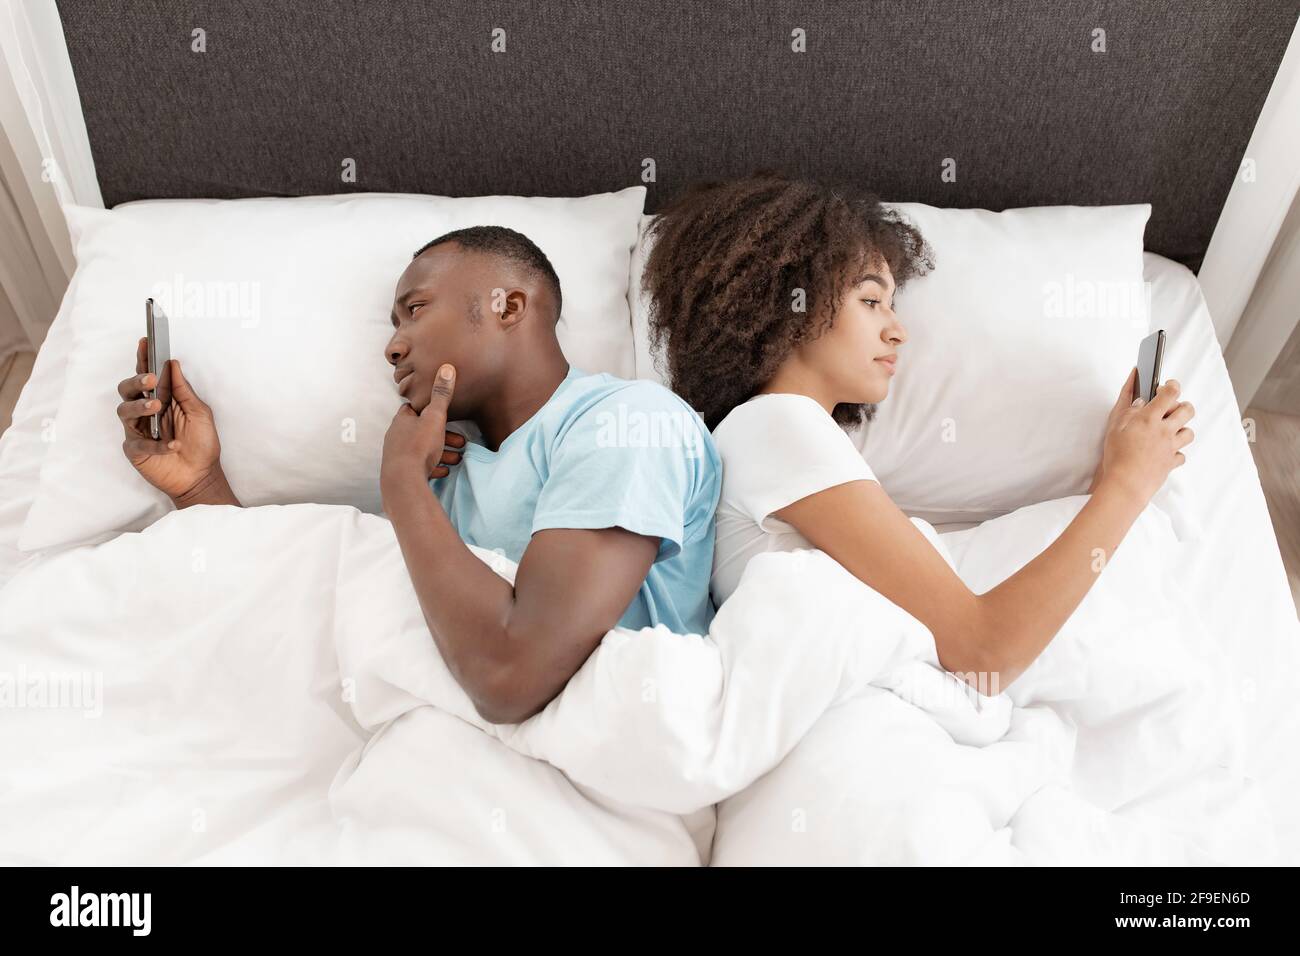 Awake using phone for chat, couple in quarrel, lying on bed back to back, using smartphones Stock Photo